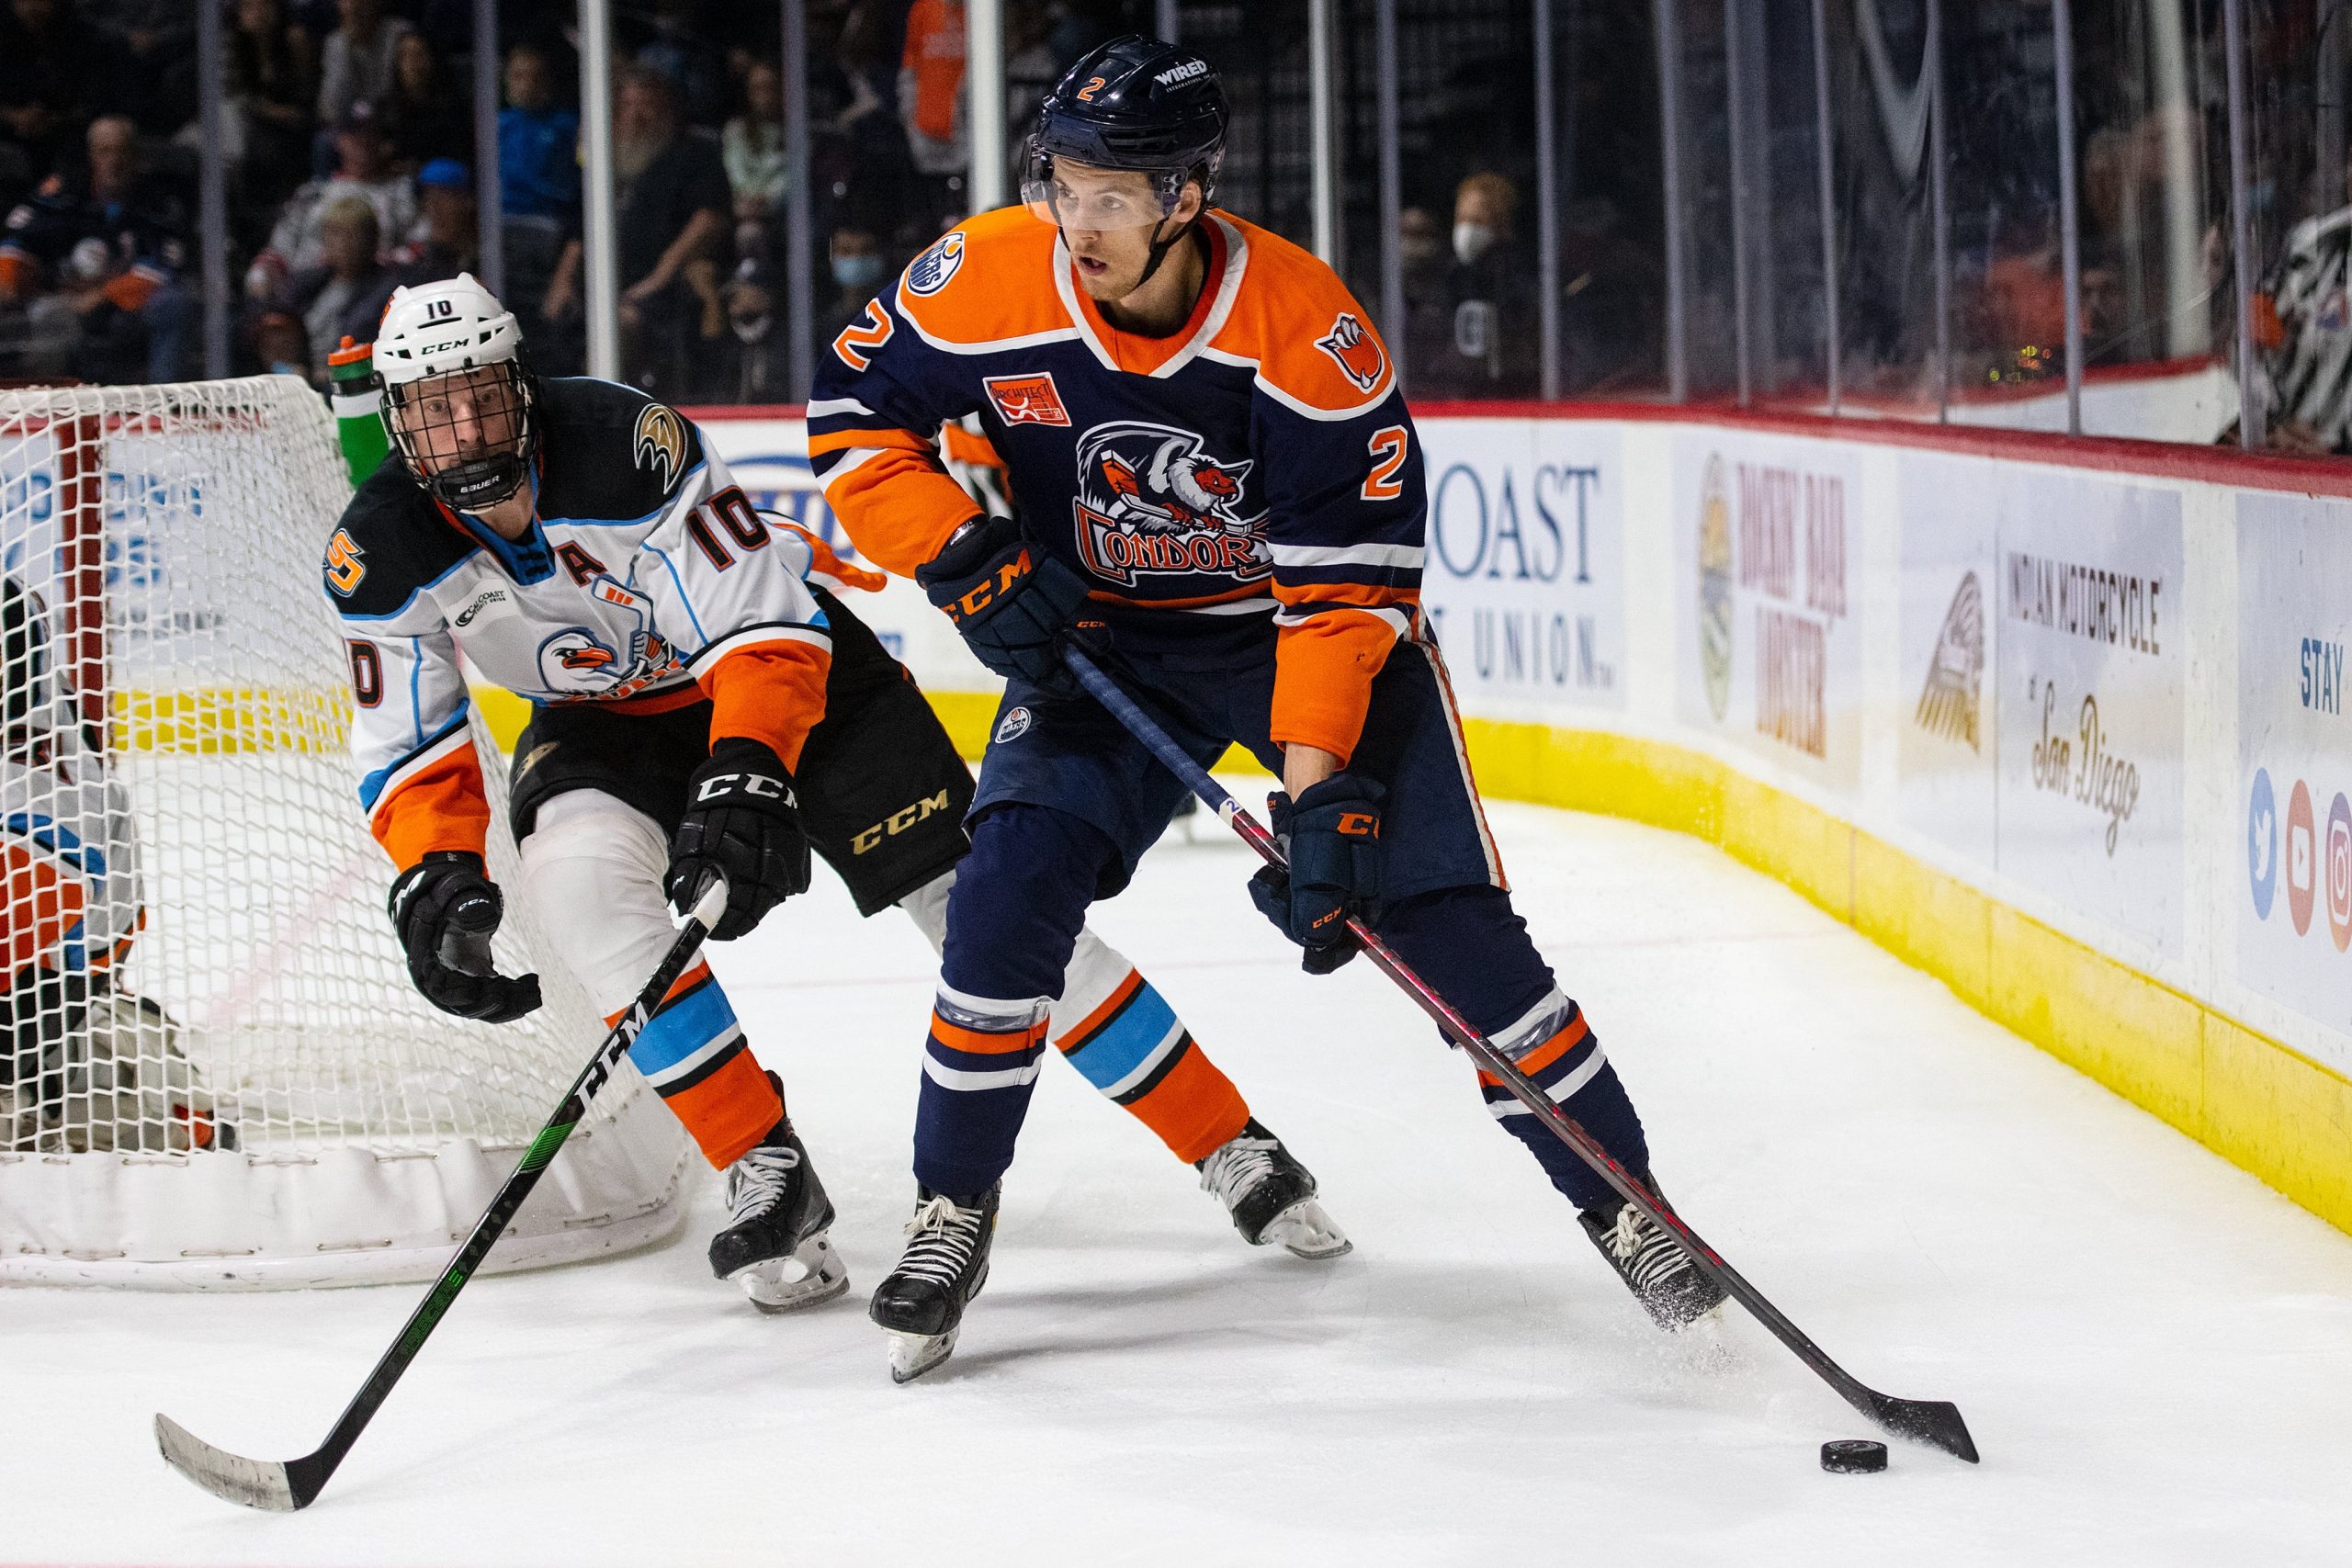 Connor McDavid's skill, poise make him player NHL has been